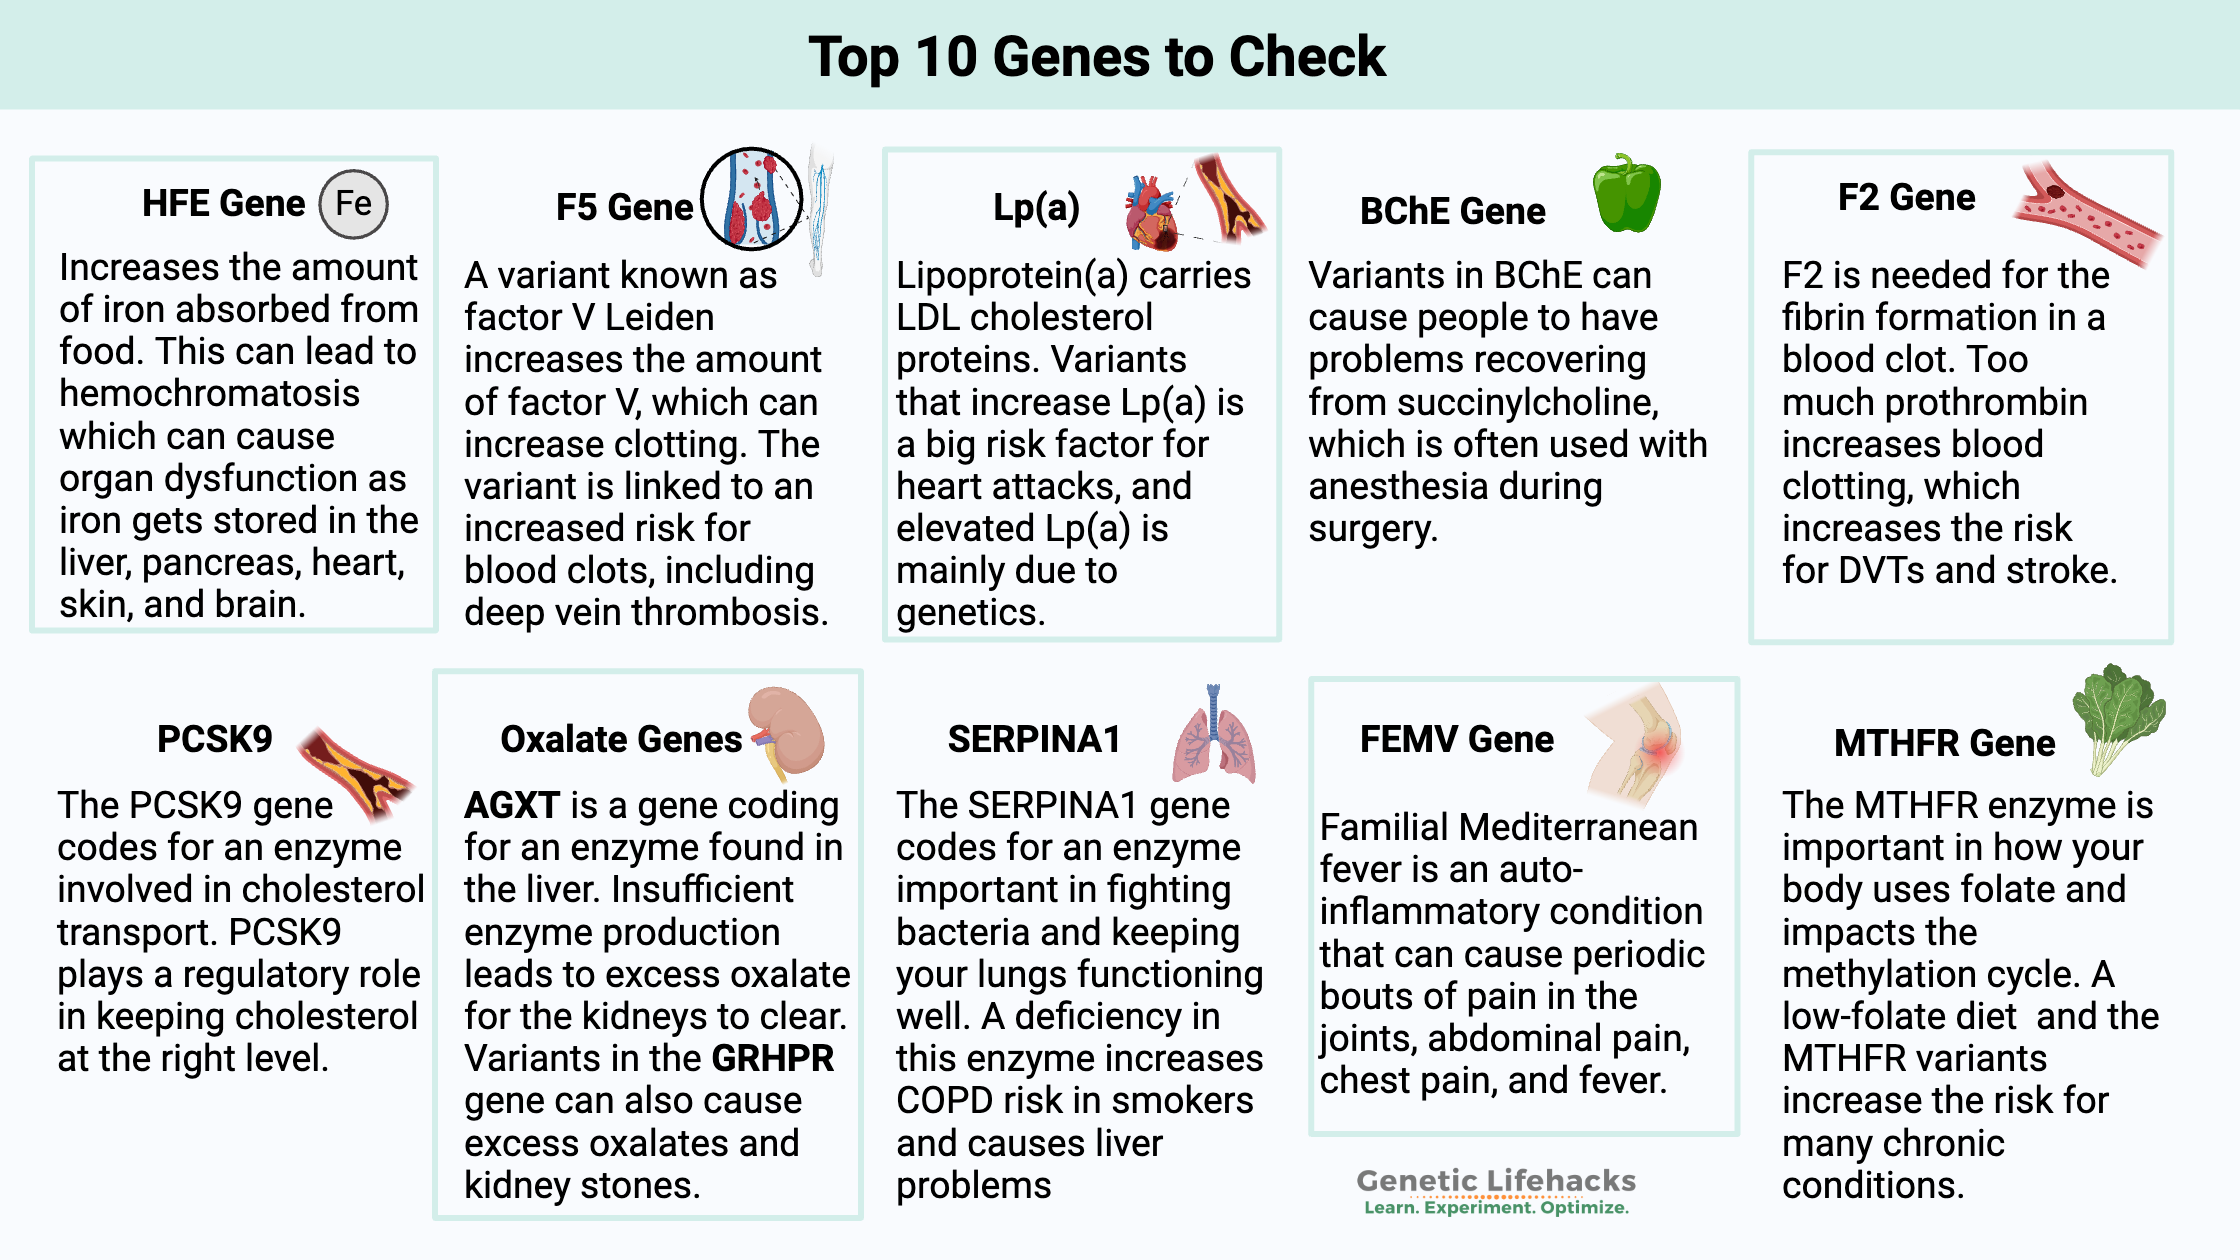 10 important genes to check with 23andMe or Ancestry data